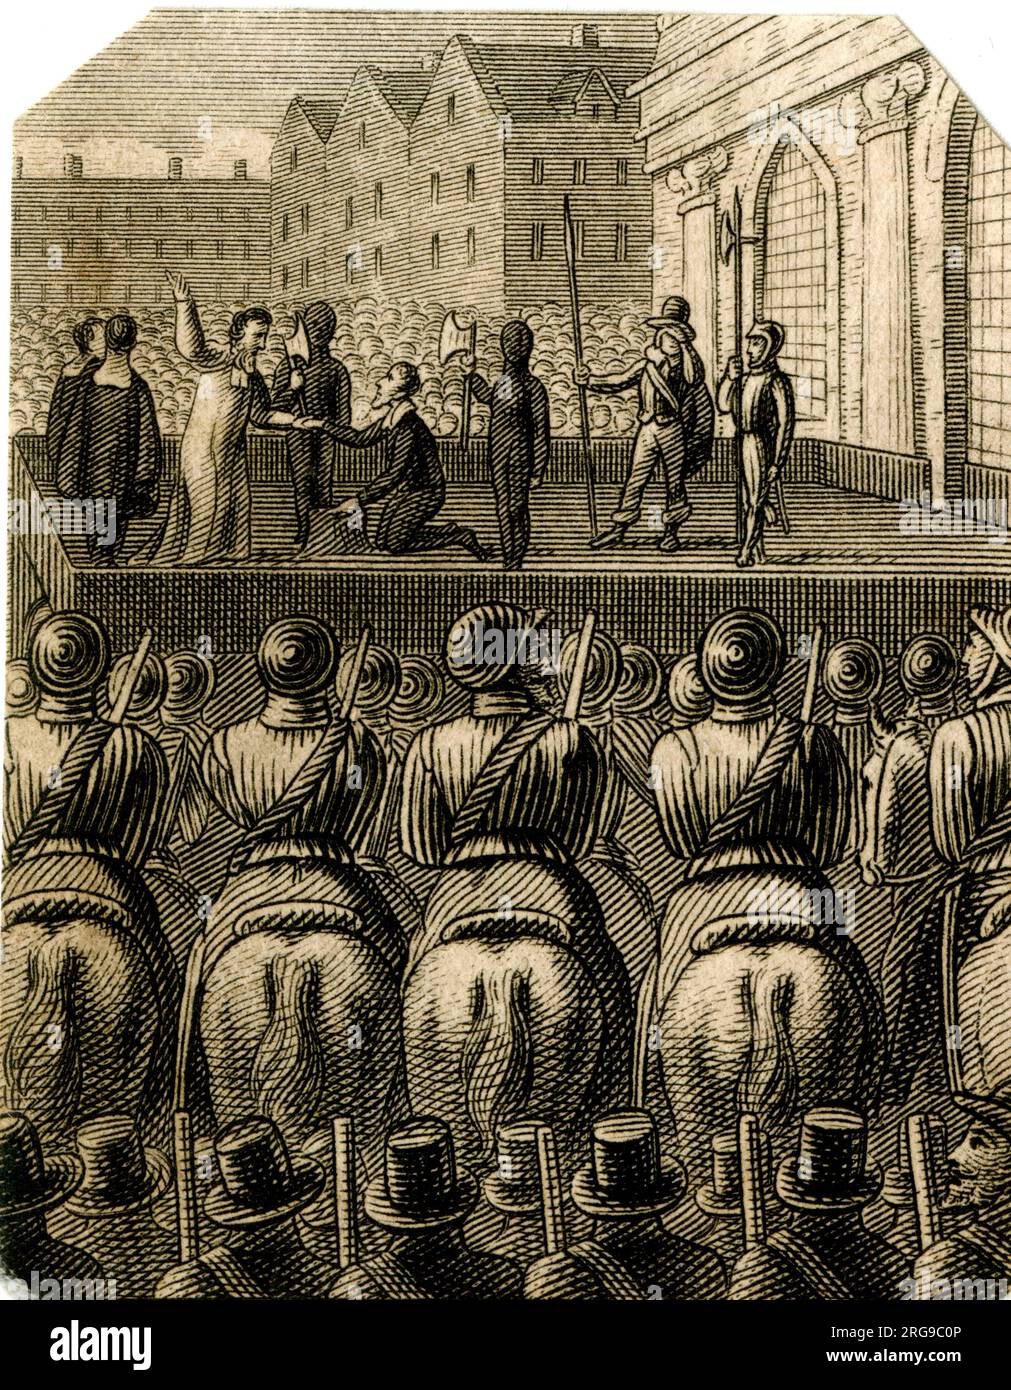 The Execution of King Charles I 1649 - 18th century engraving Stock Photo